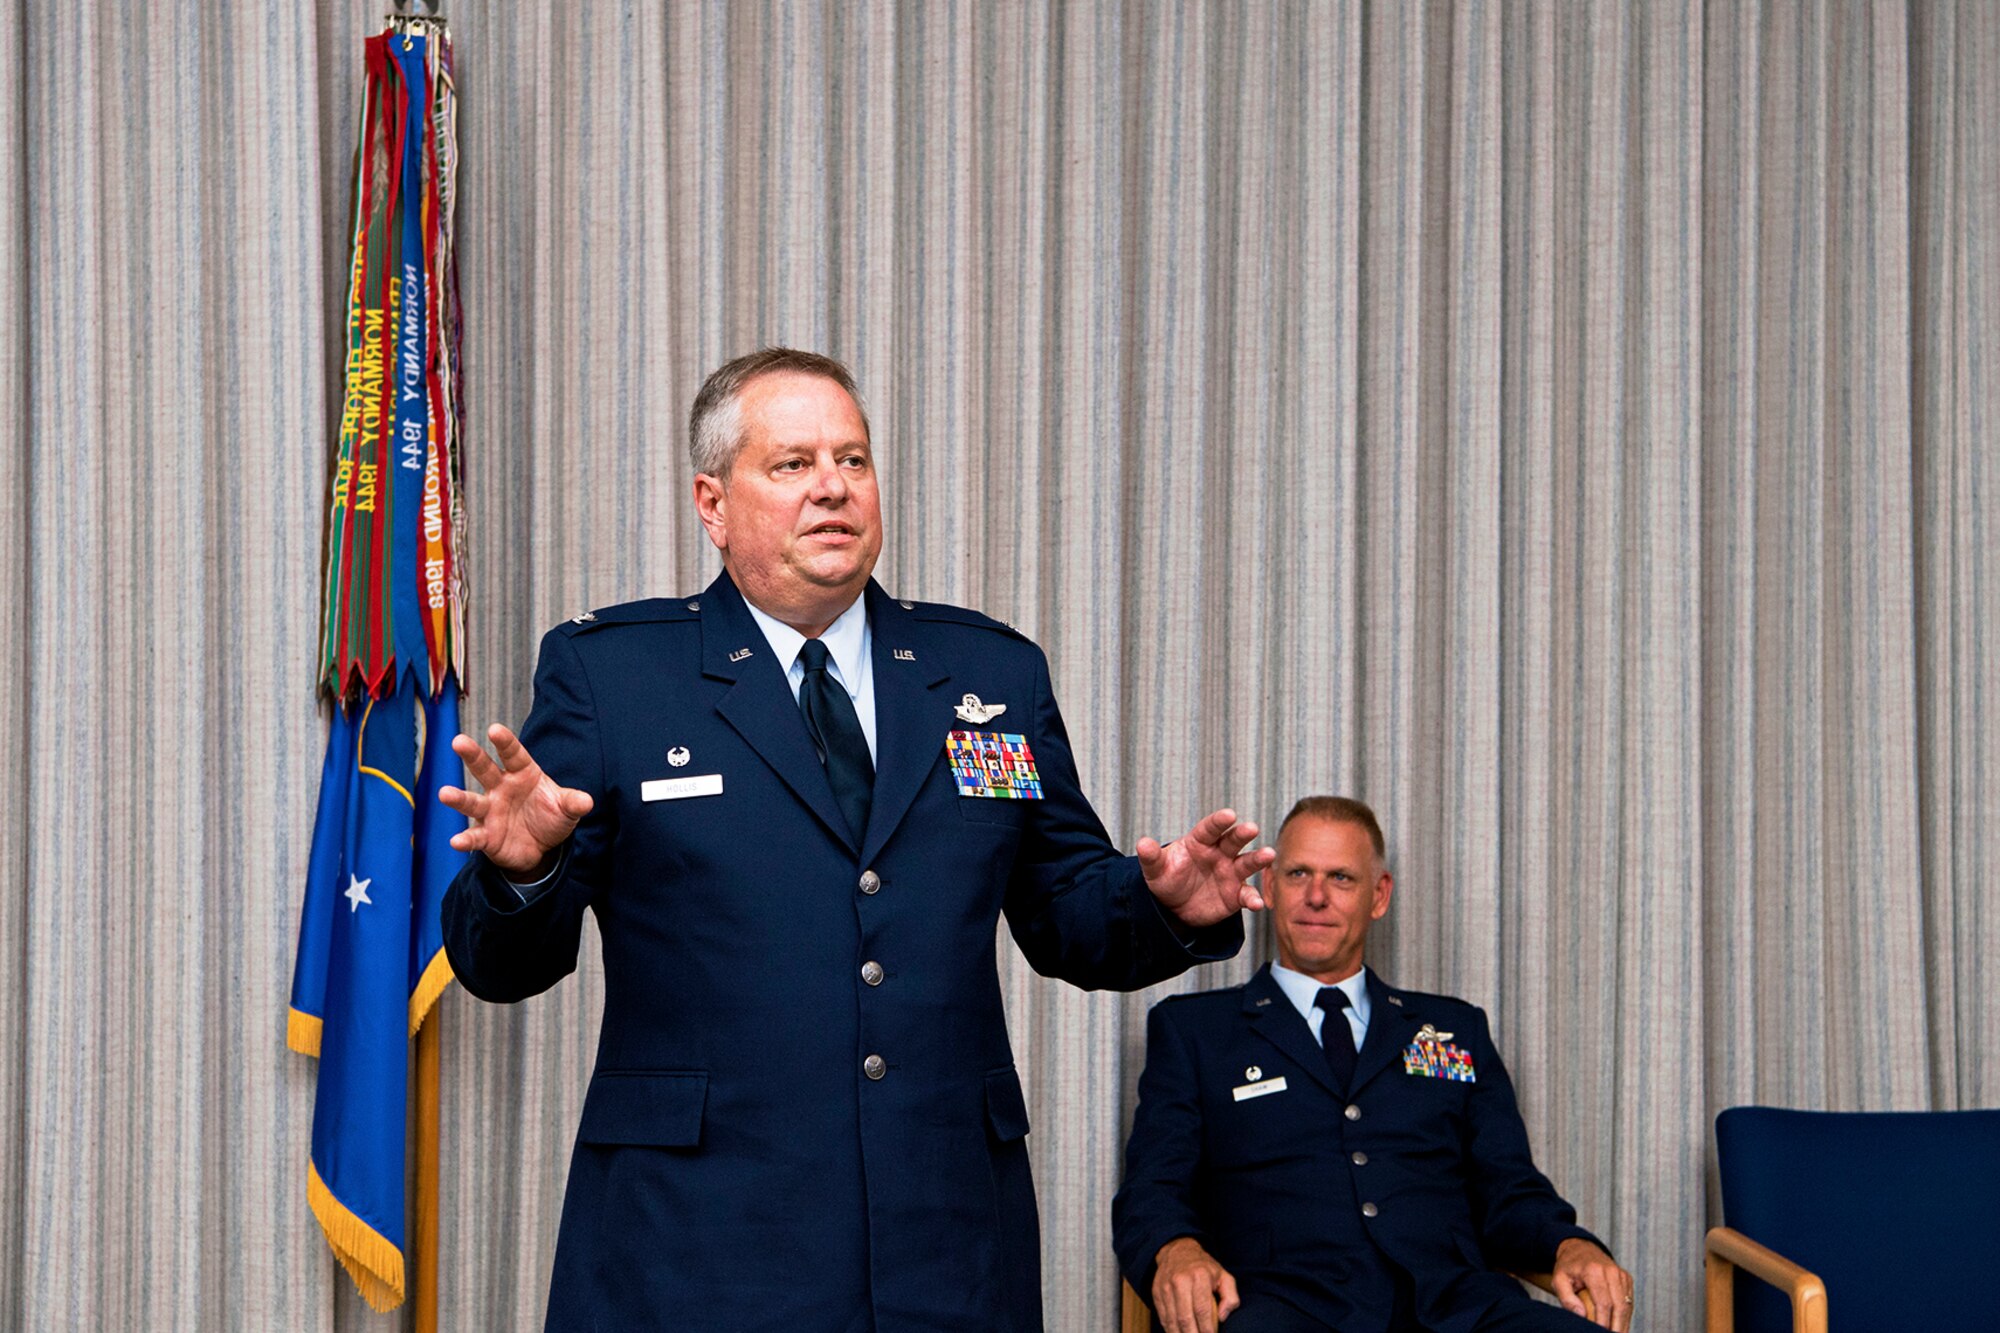 Colonel Brian Hollis, 434th Operations Group commander, addresses the audience at his assumption of command ceremony at Grissom Air Reserve Base, Ind., July 15, 2018. Hollis filled the vacancy of Lt. Col. Todd Moody, who retired in June. (U.S. Air Force photo / Senior Airman Harrison Withrow)